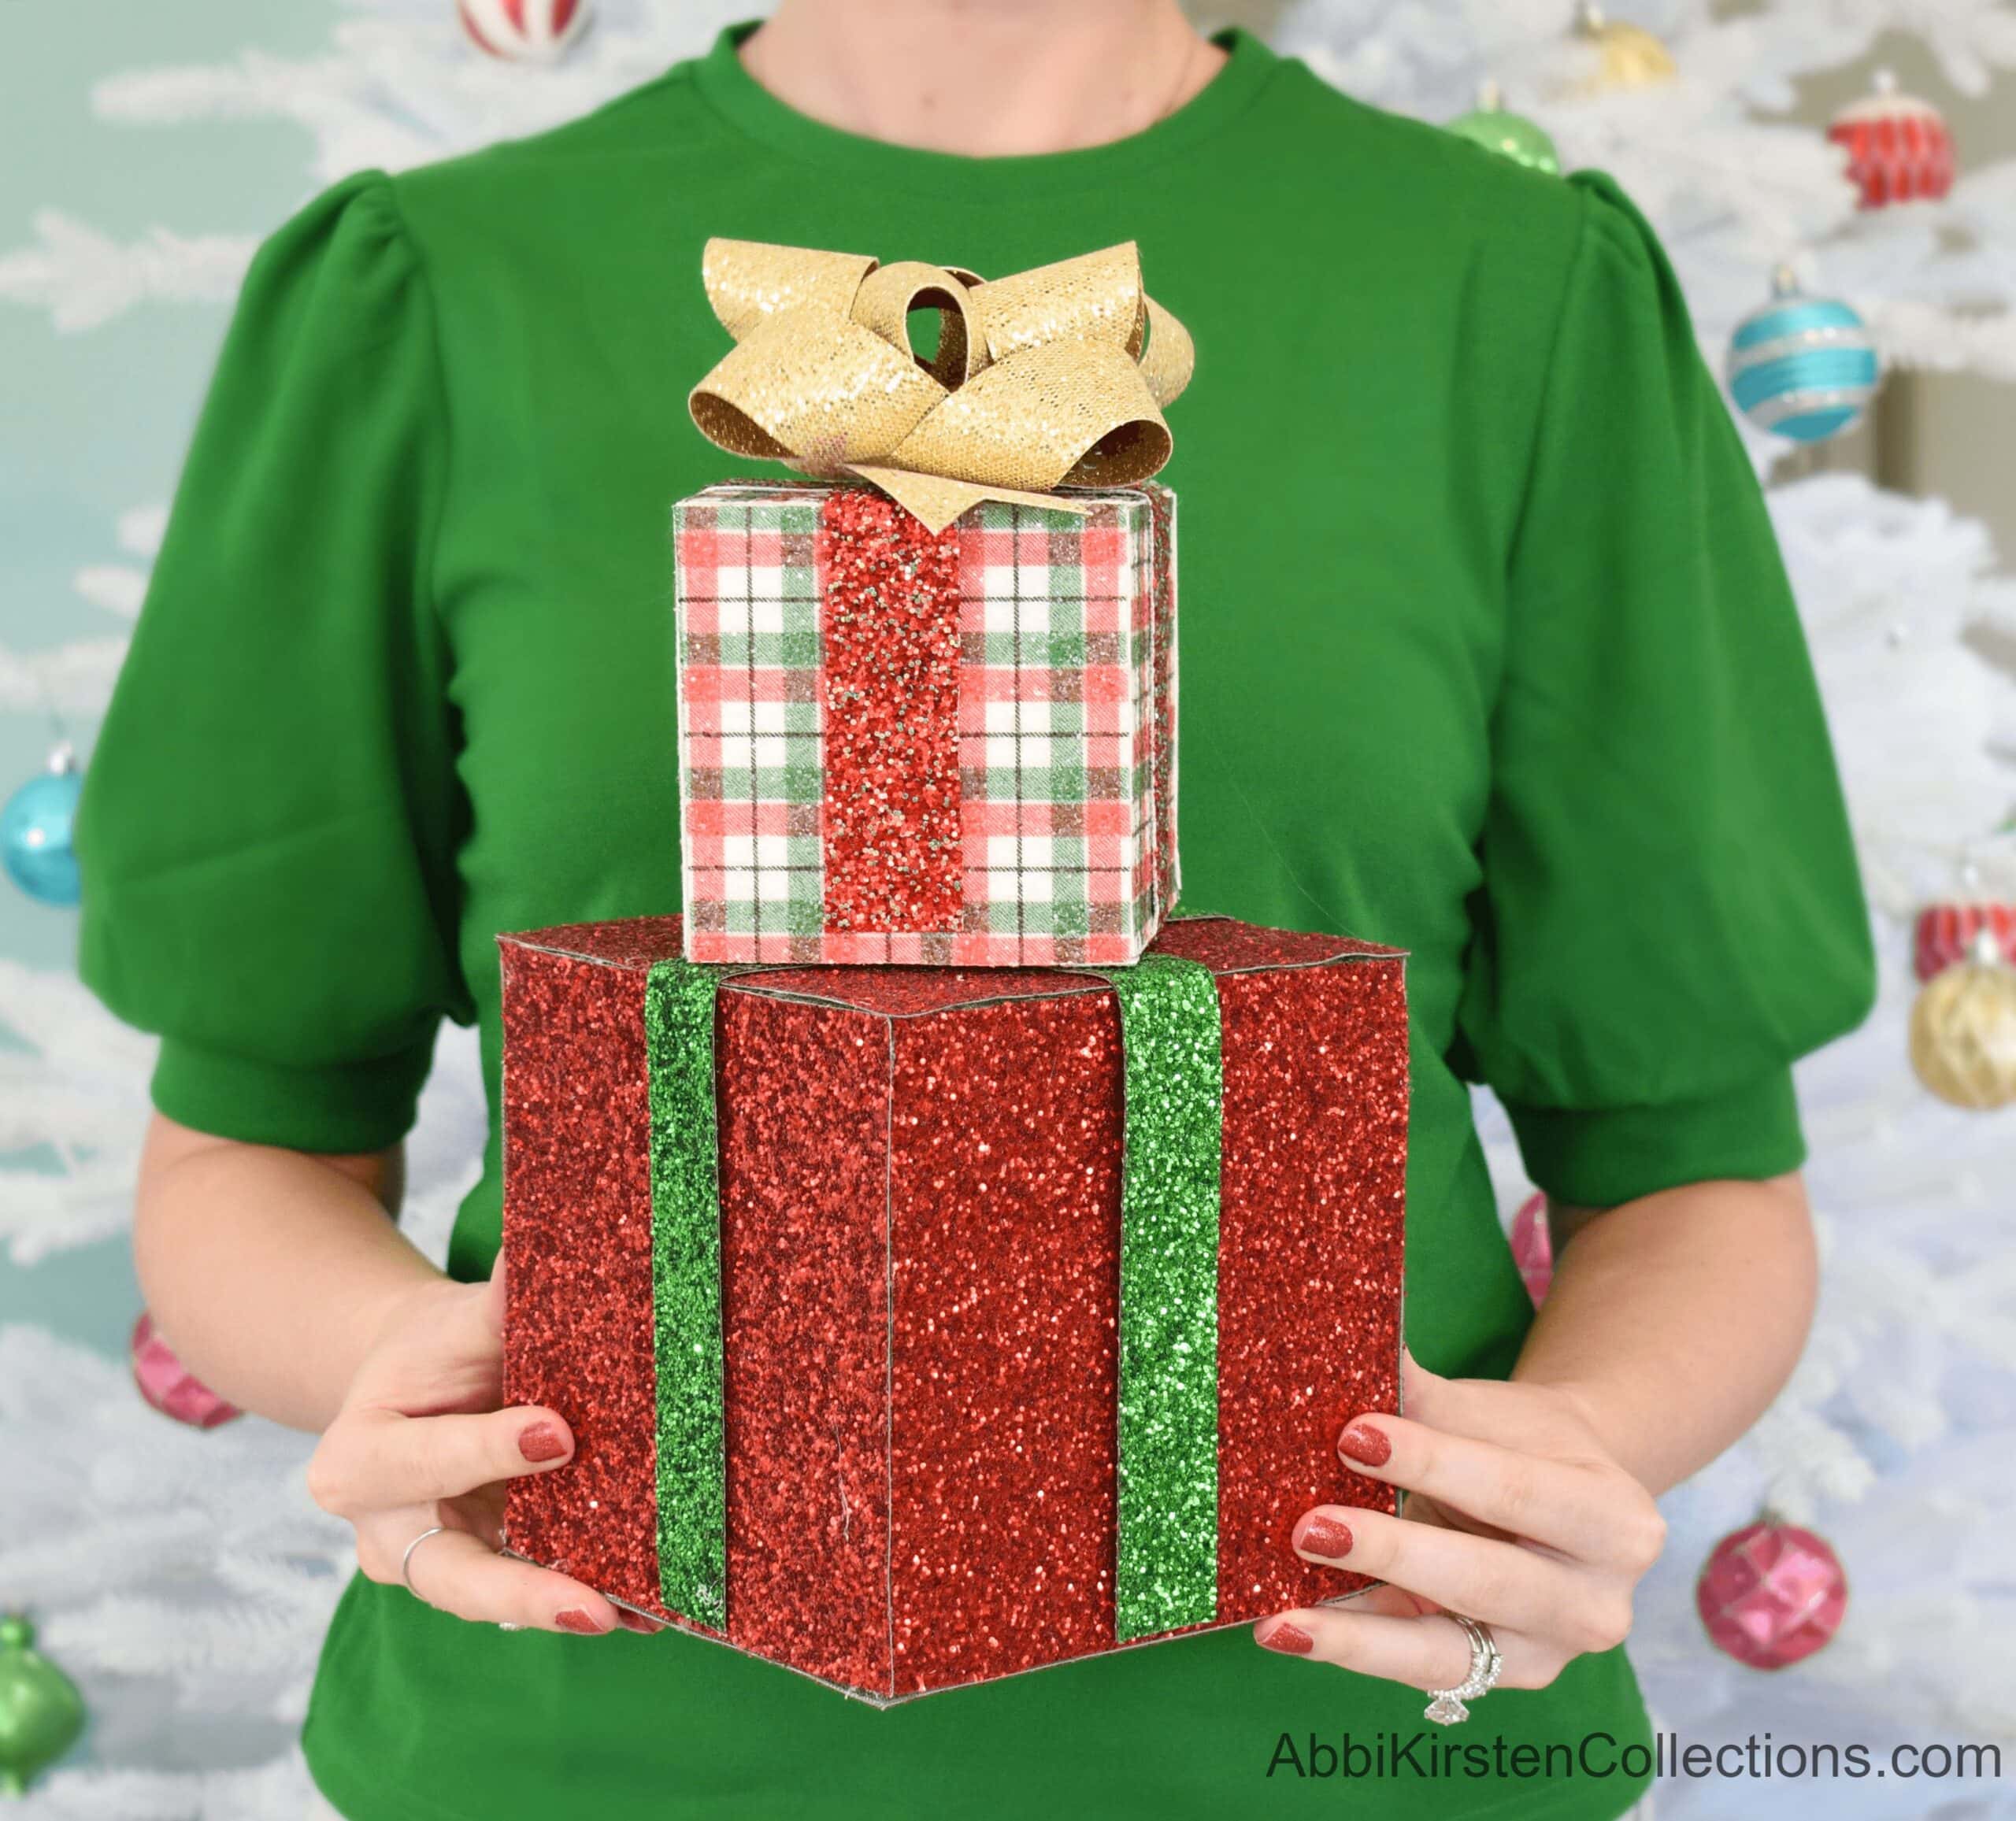 A woman wearing a short-sleeved green shirt holds two stacked decorative gift boxes. The larger box is red with green ribbon, and the top box is a red, white, and green plaid with a gold ribbon.